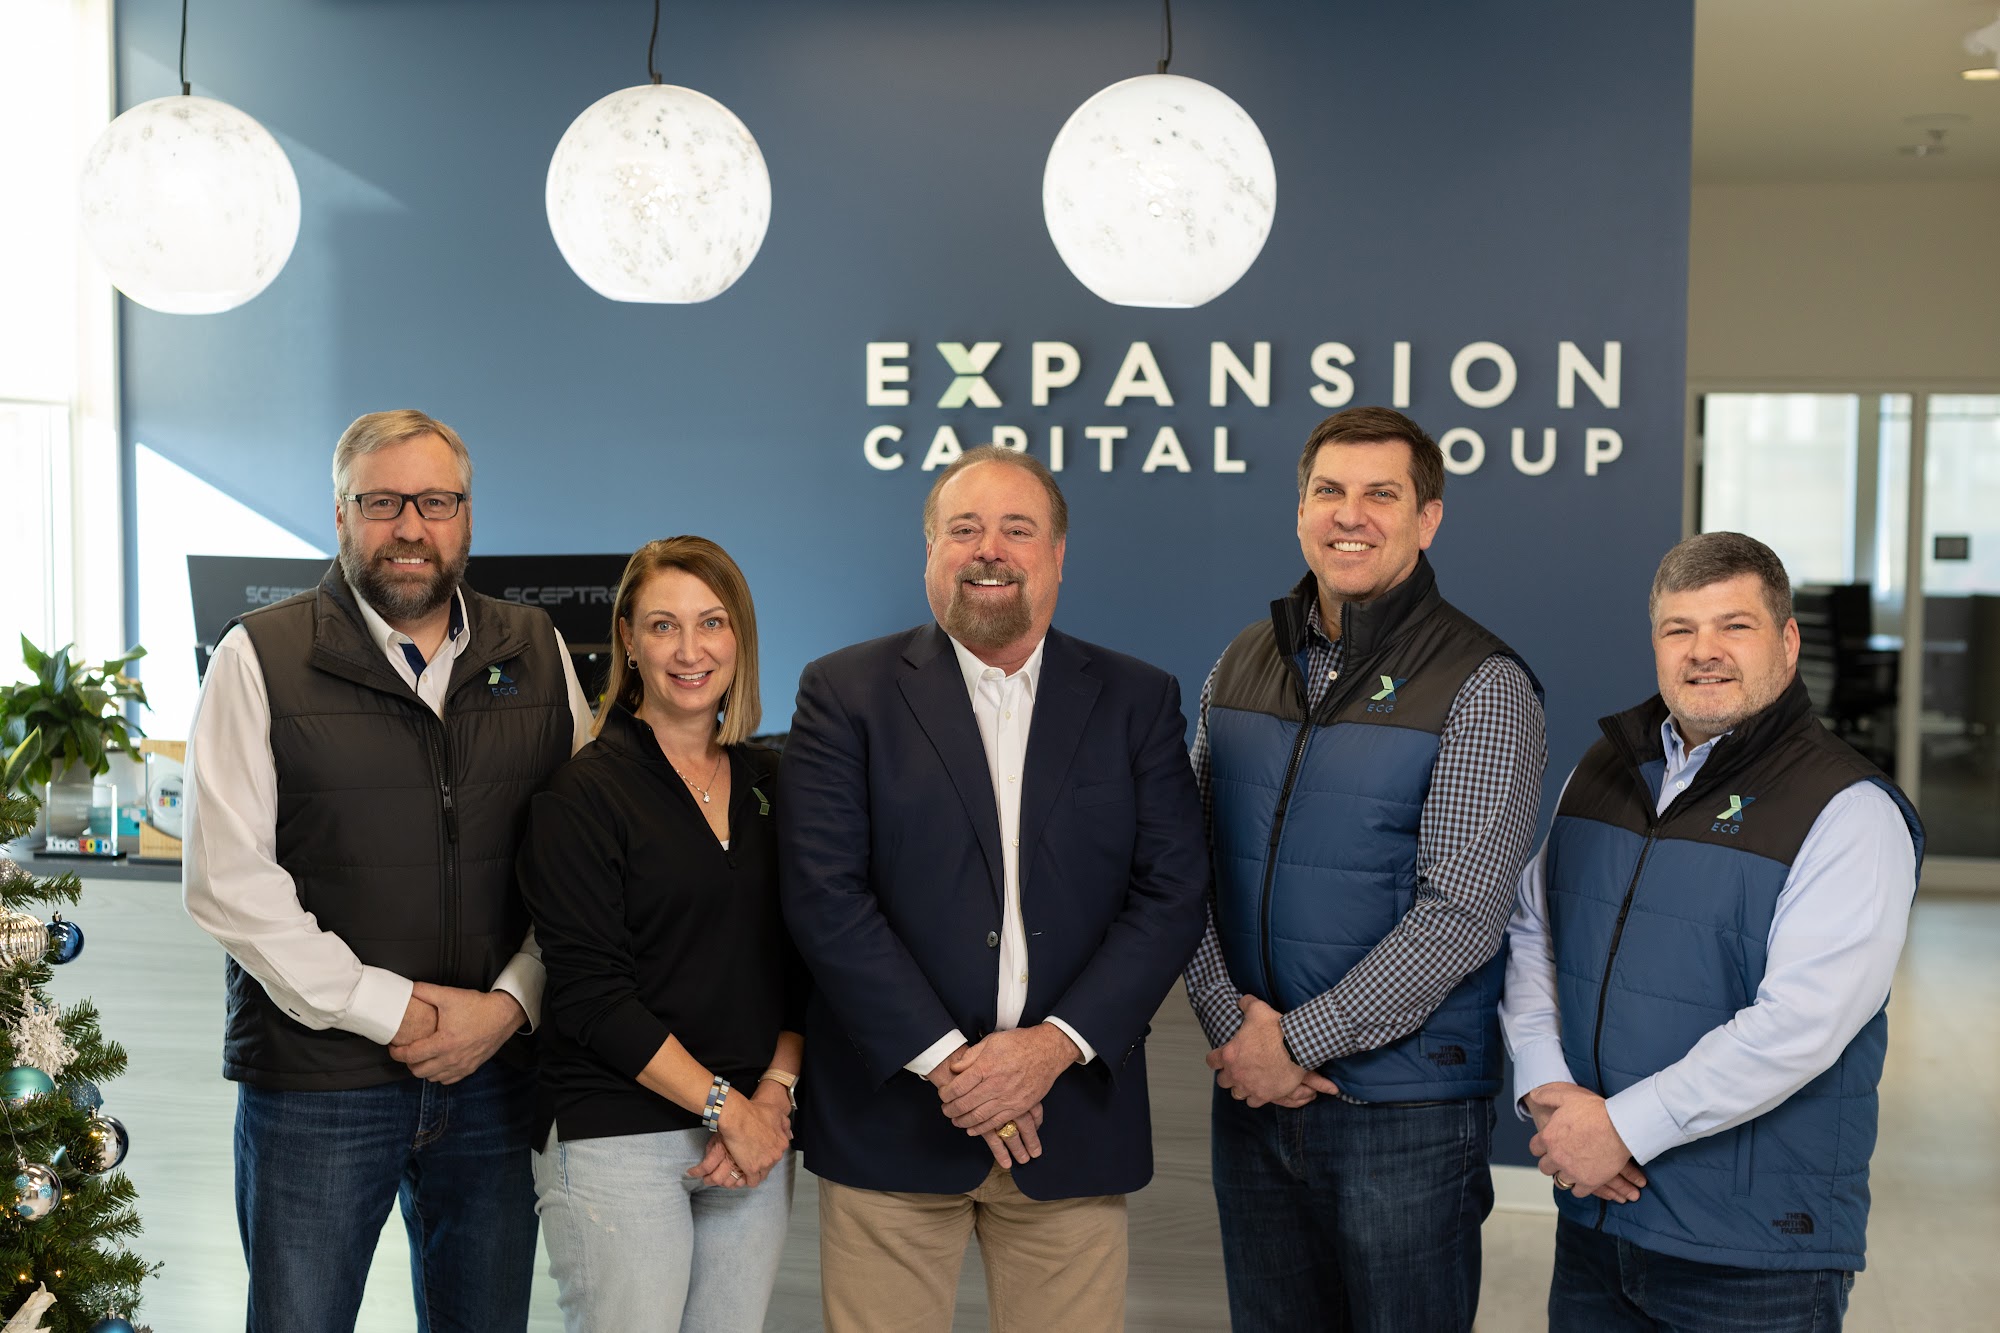 Expansion Capital Group